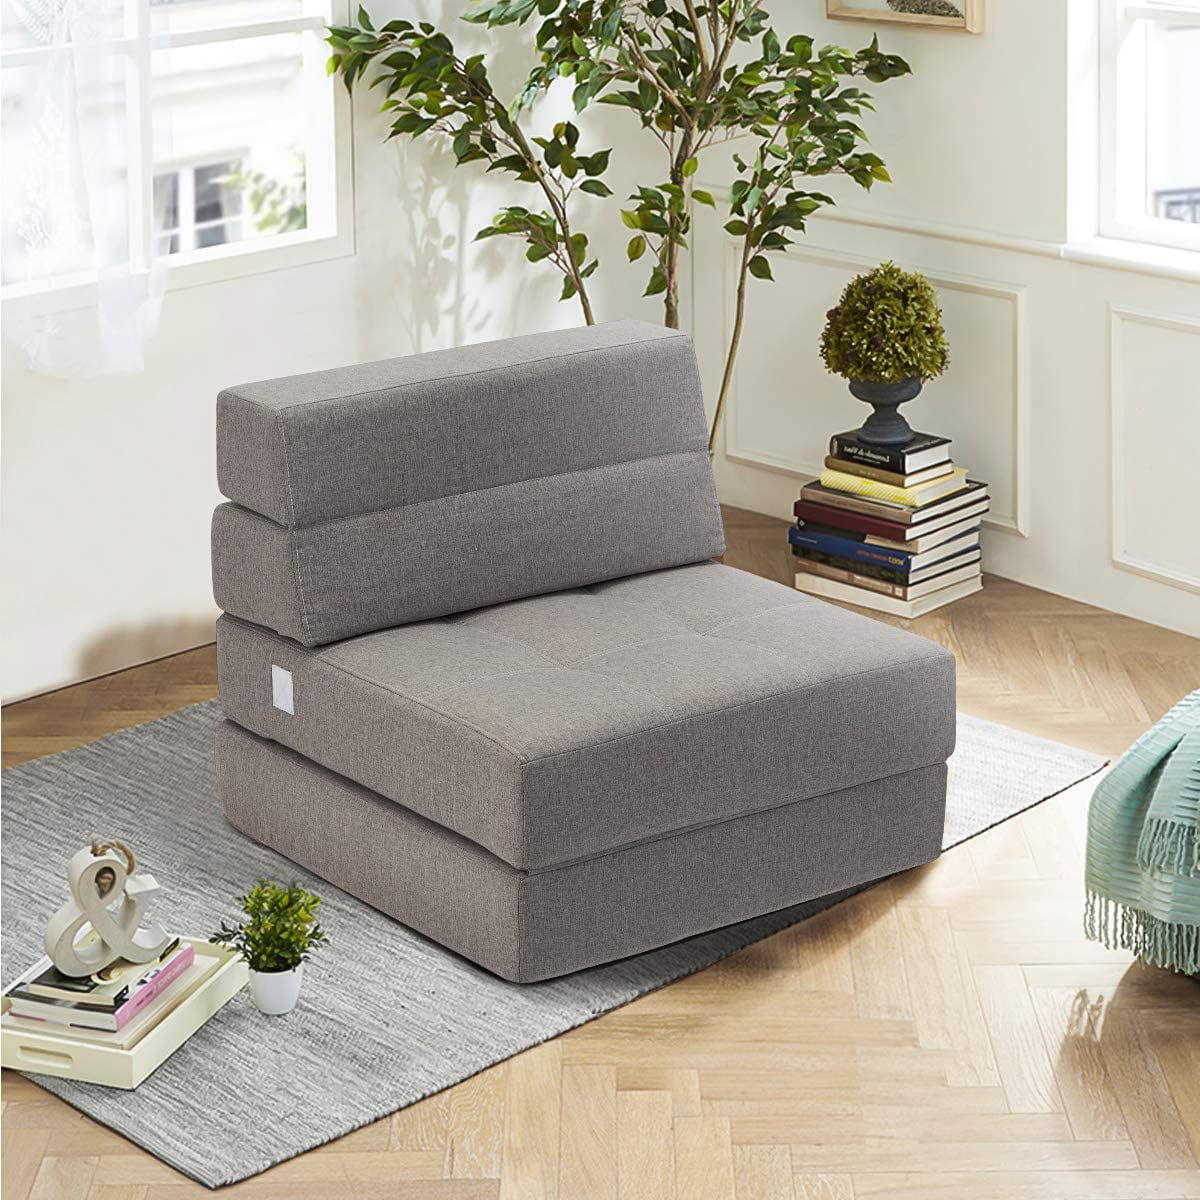 Erommy Fold Down Fabric Sofa Bed, Sleeper Sofa 2 In 1 Tri Fold Grey Intended For 2 In 1 Foldable Sofas (Gallery 1 of 20)